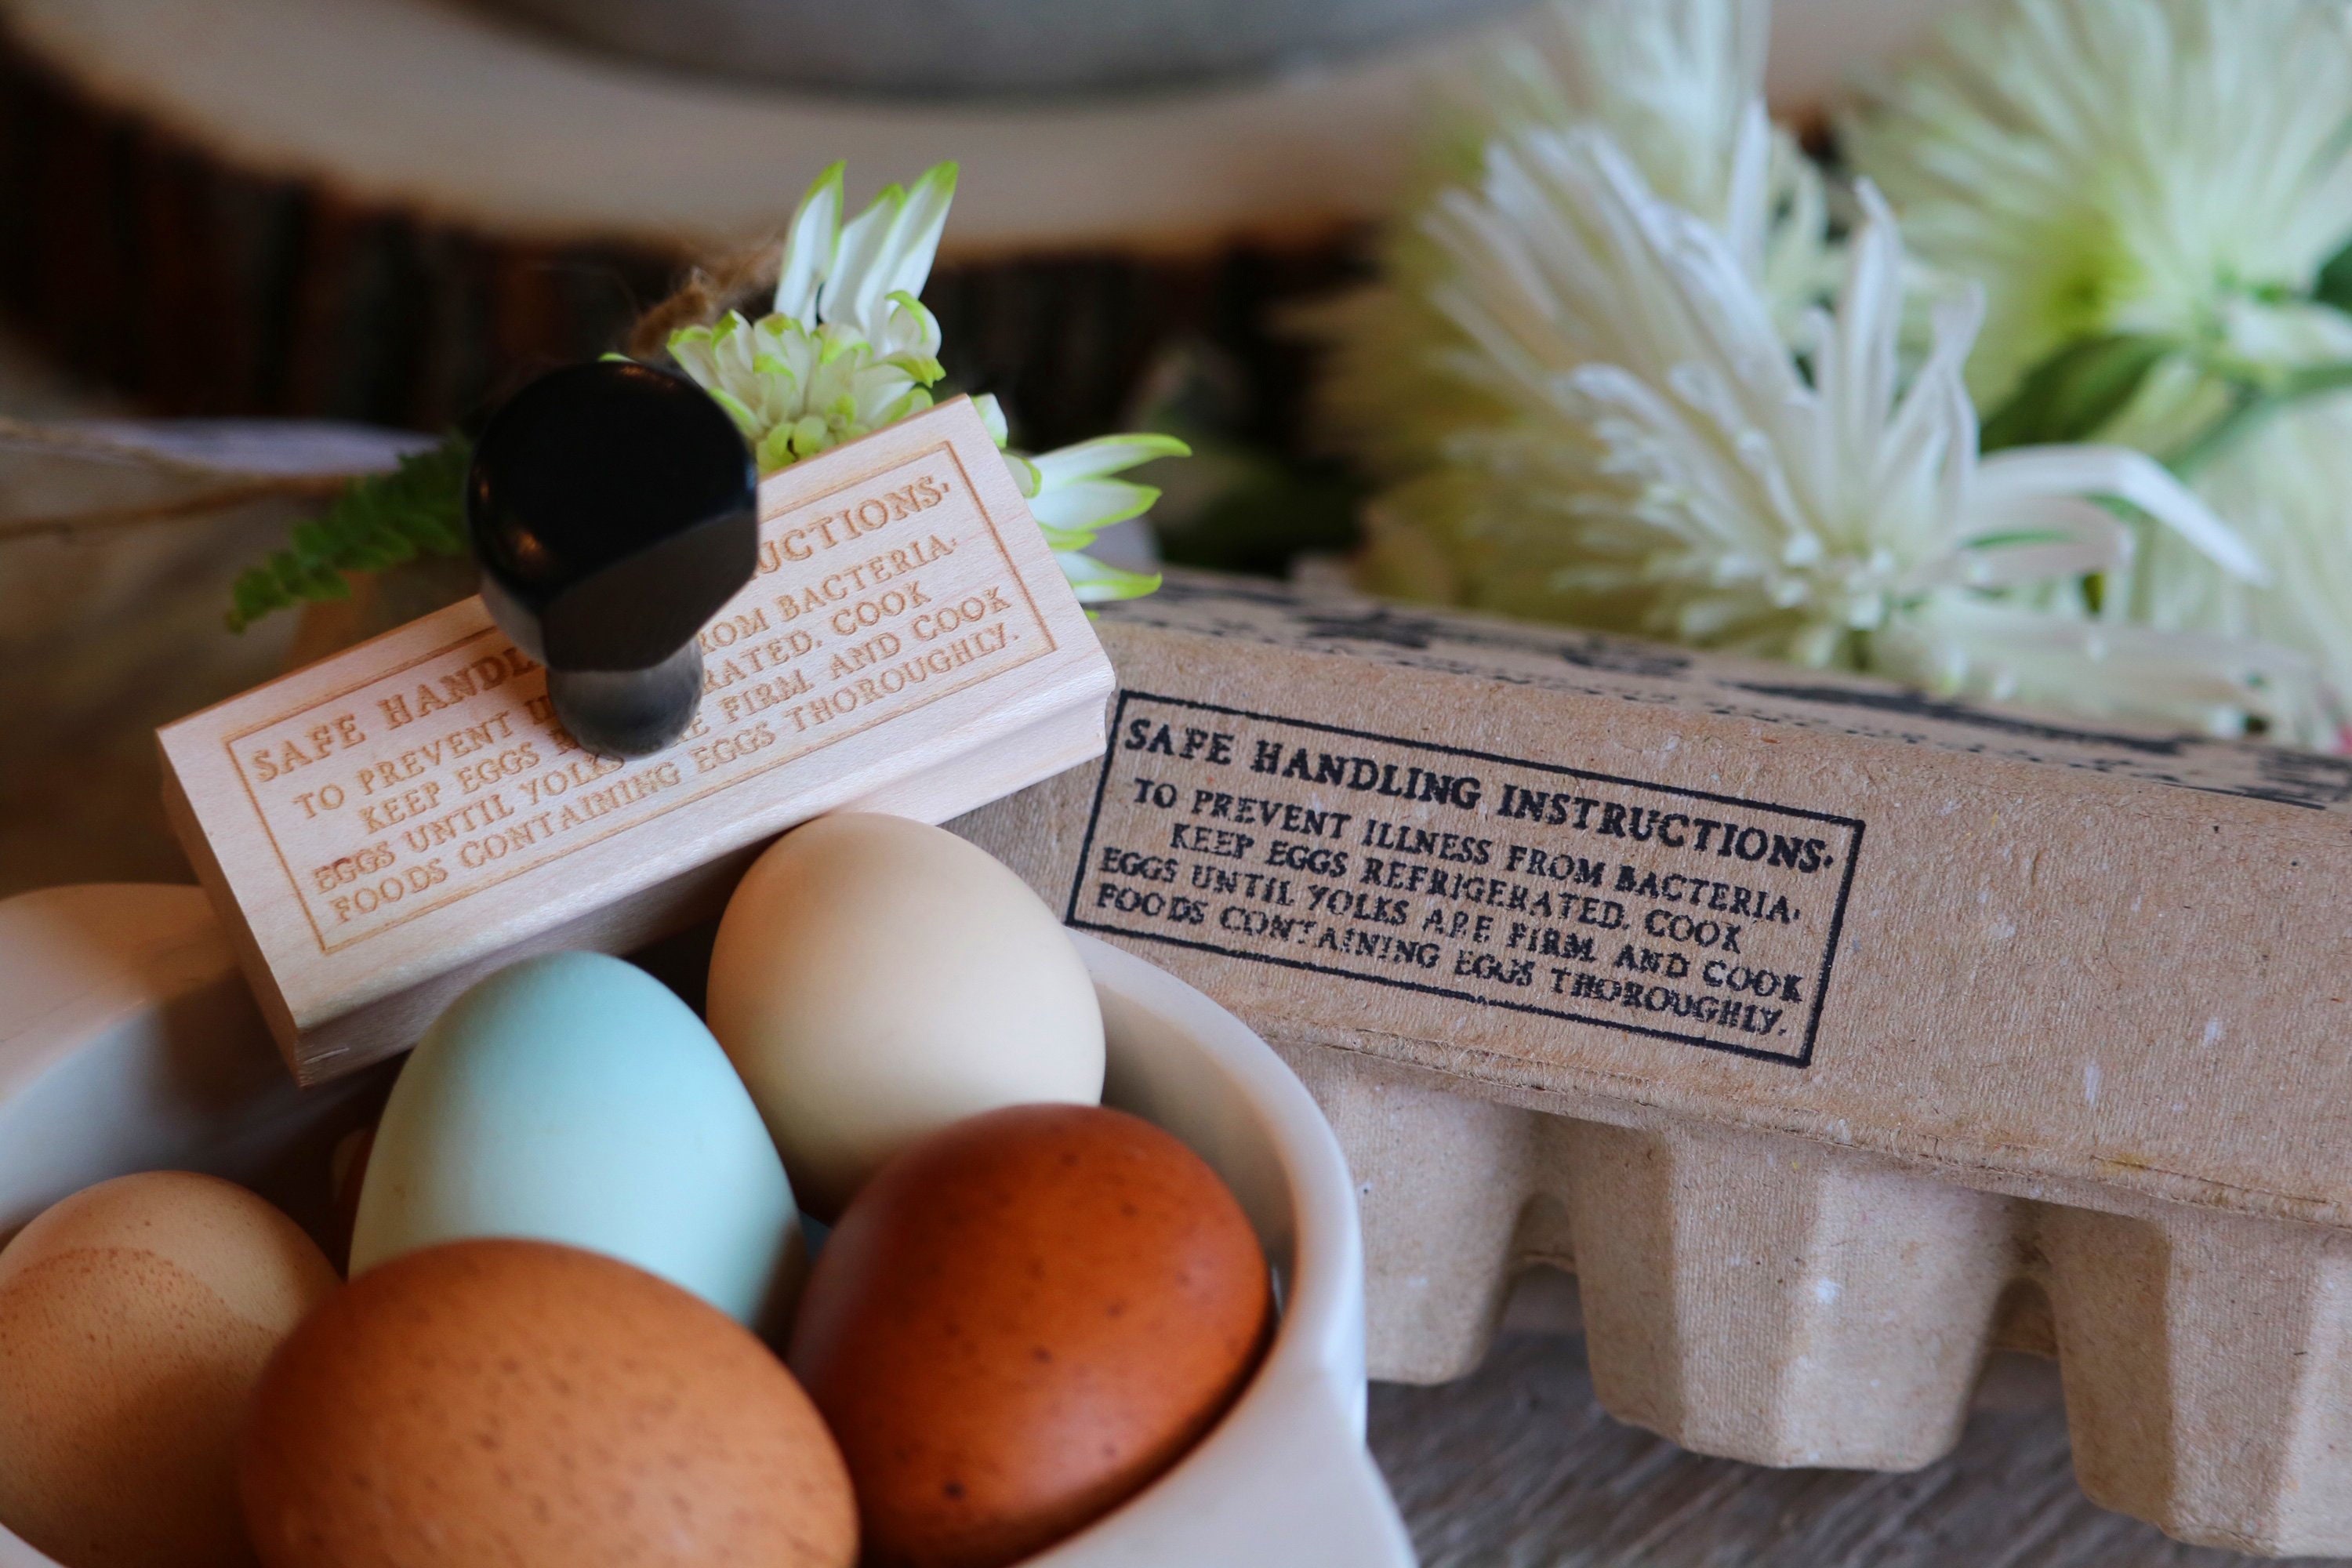 Fresh Eggs Collected On Date Stamp – Wild Feather Farm